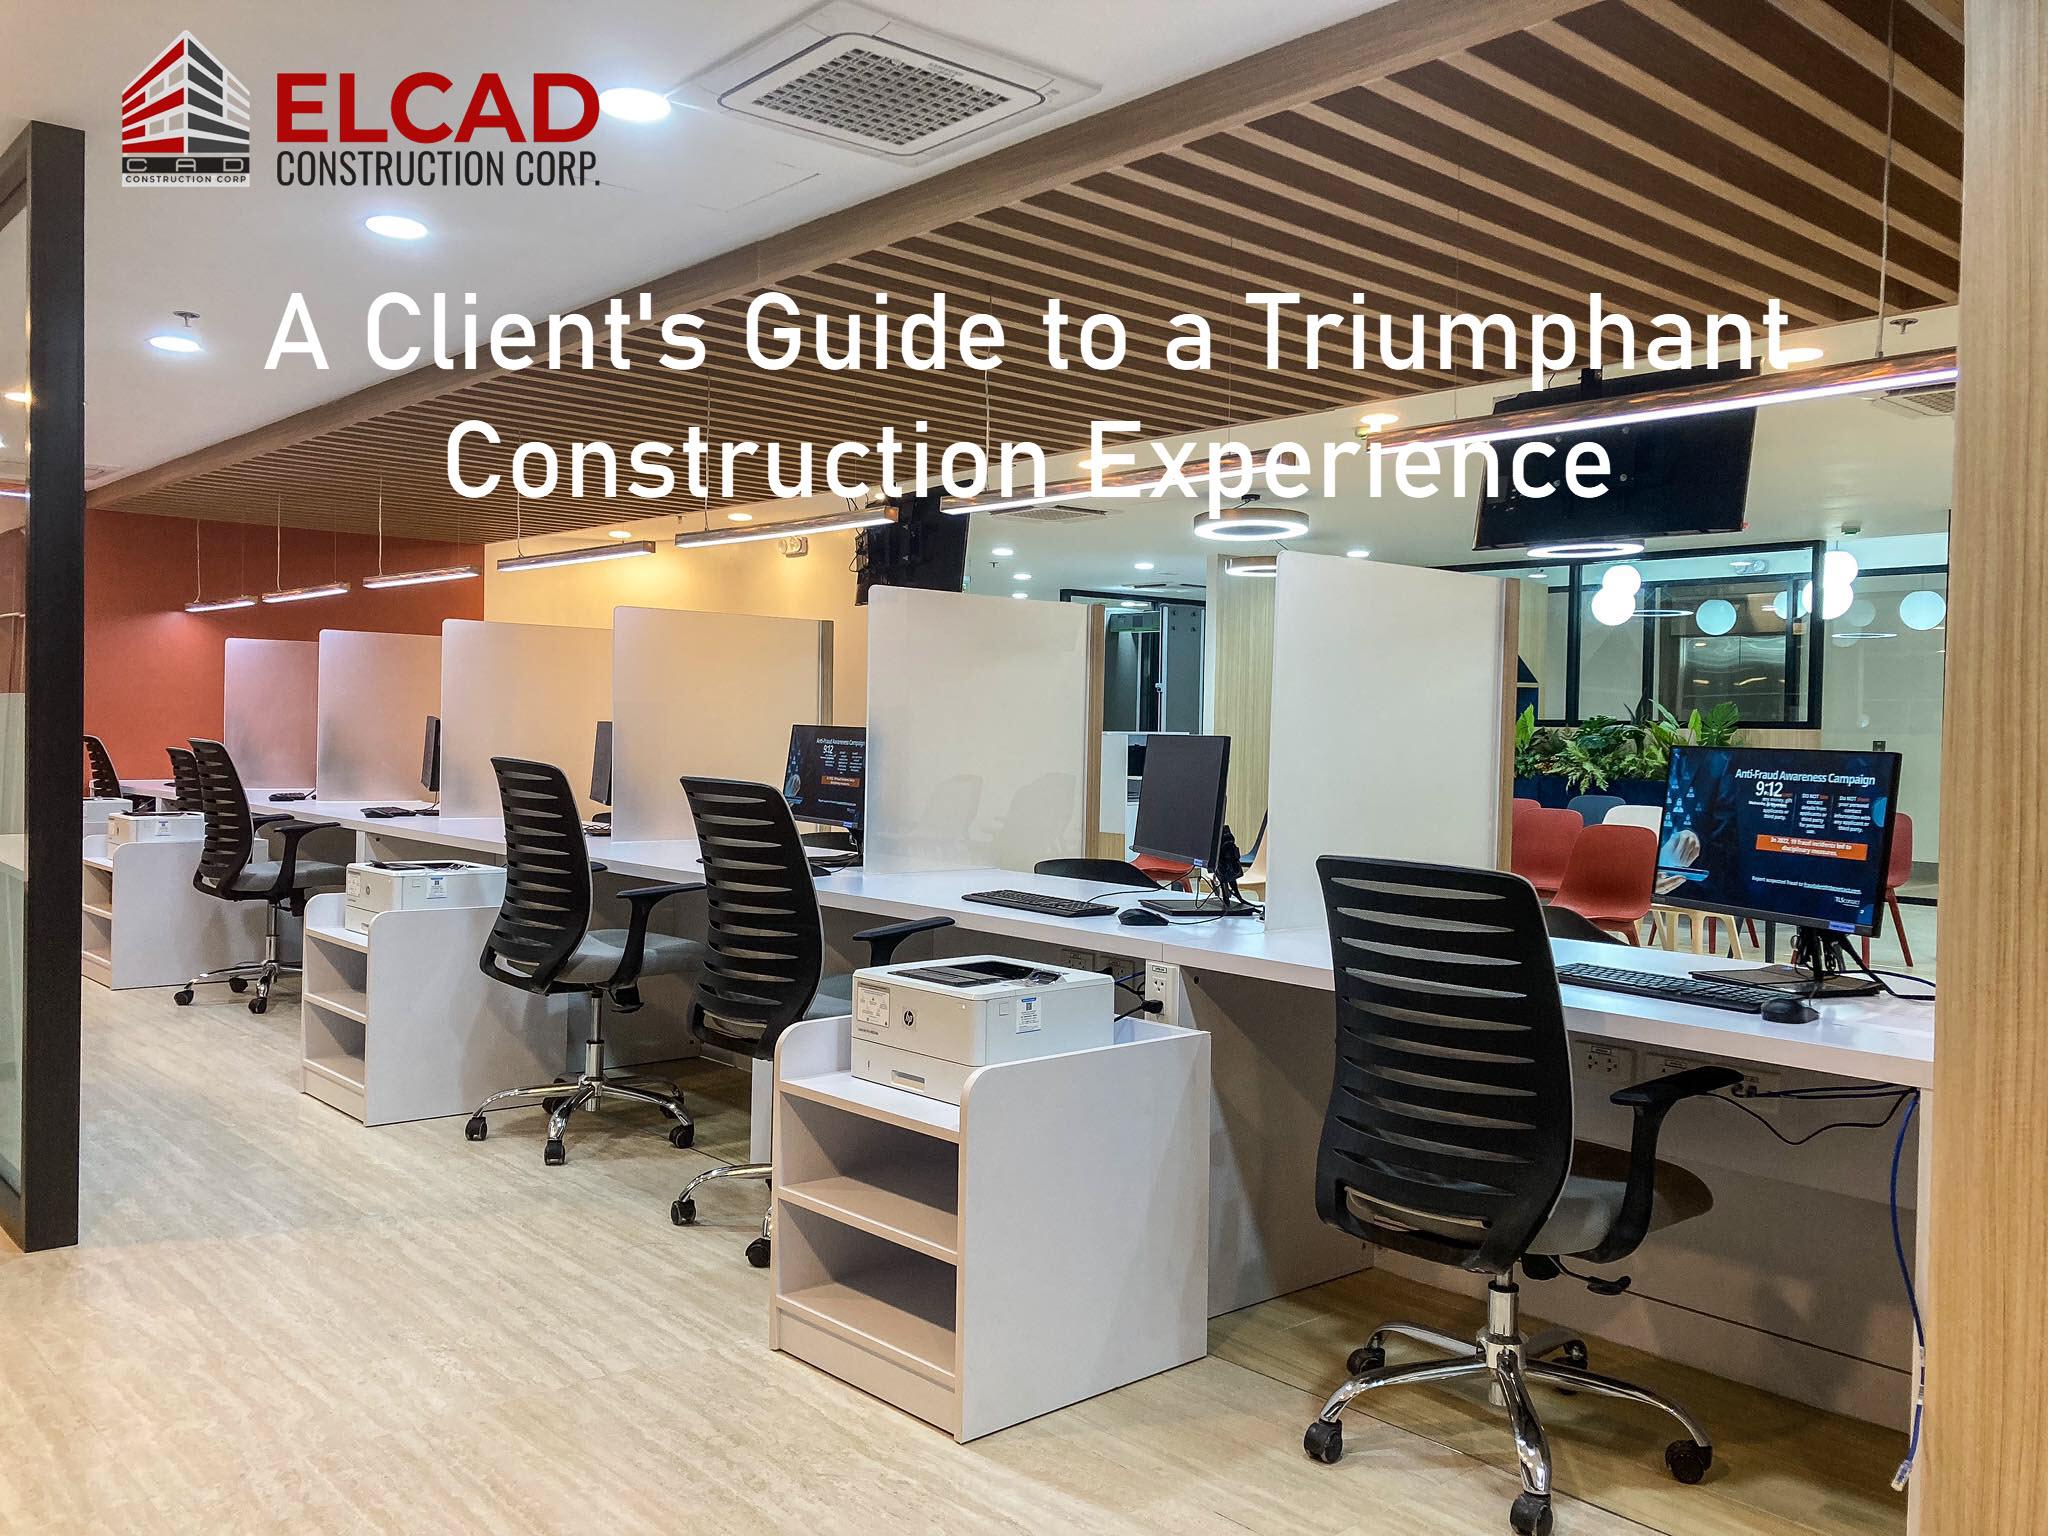 A Client's Guide to a Triumphant Construction Experience